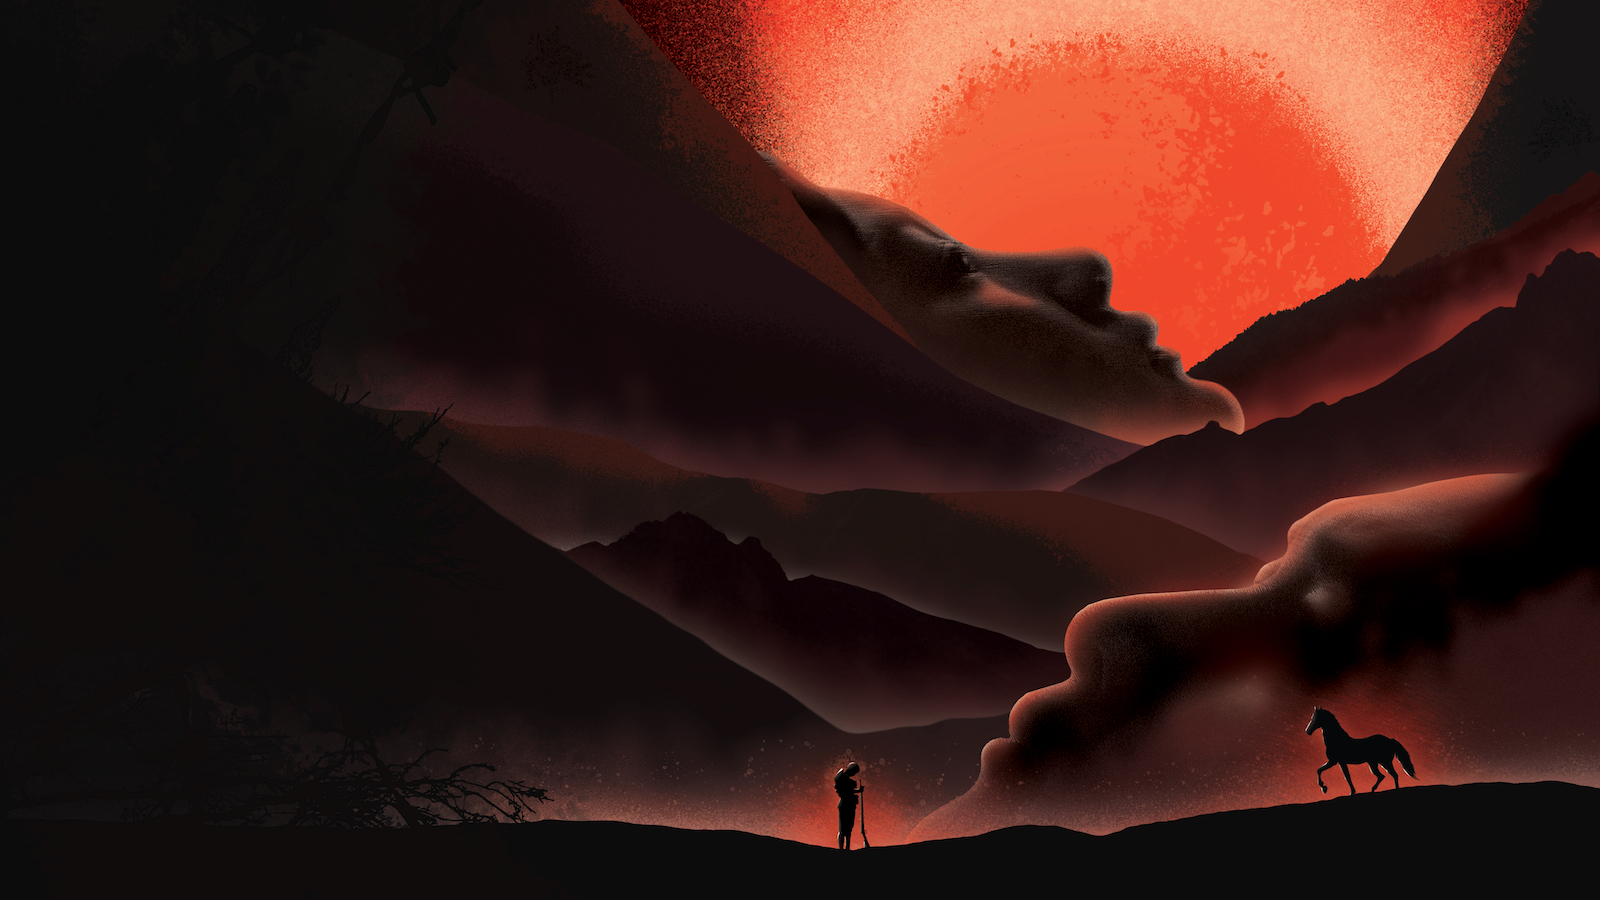 An illustration of a dark landscape where some of the mountains resemble human faces. An orange sun looms large in the horizon, and a lone figure and horse stand at the bottom.